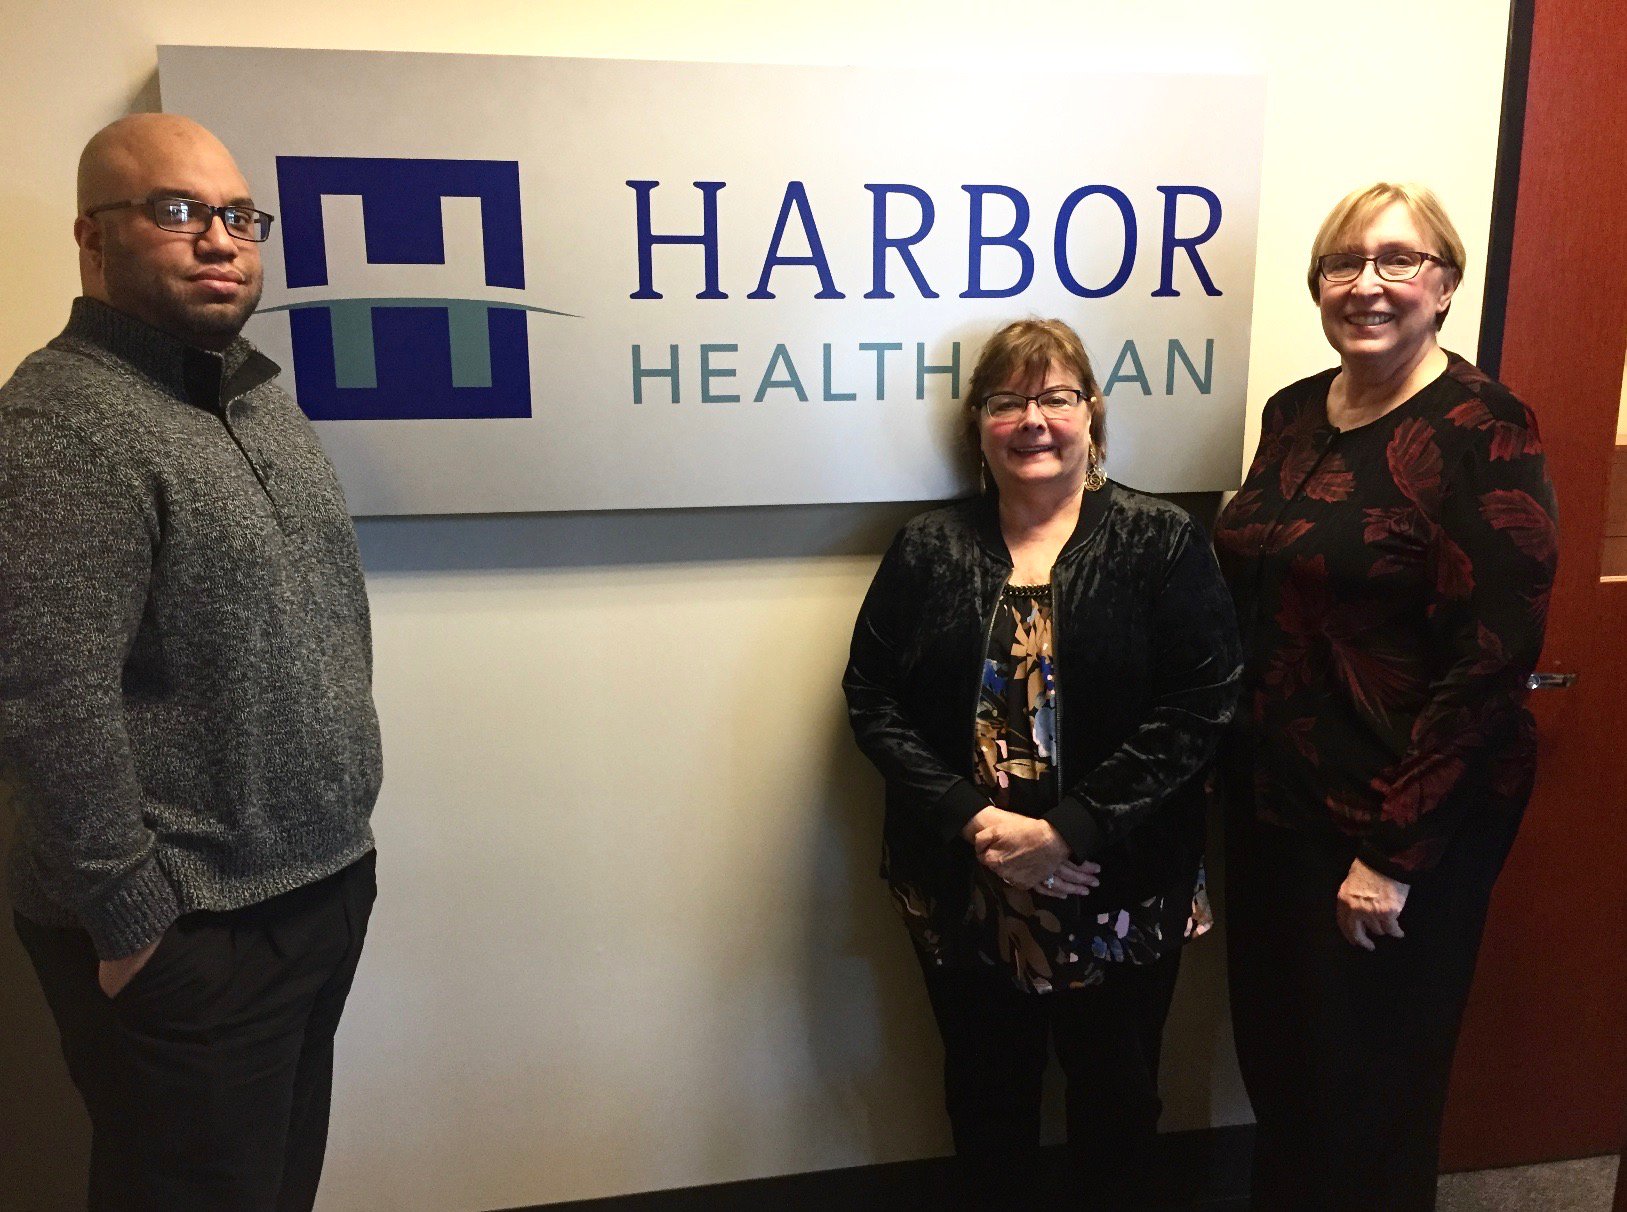 Harbor Health employees in front of Harbor Health sign